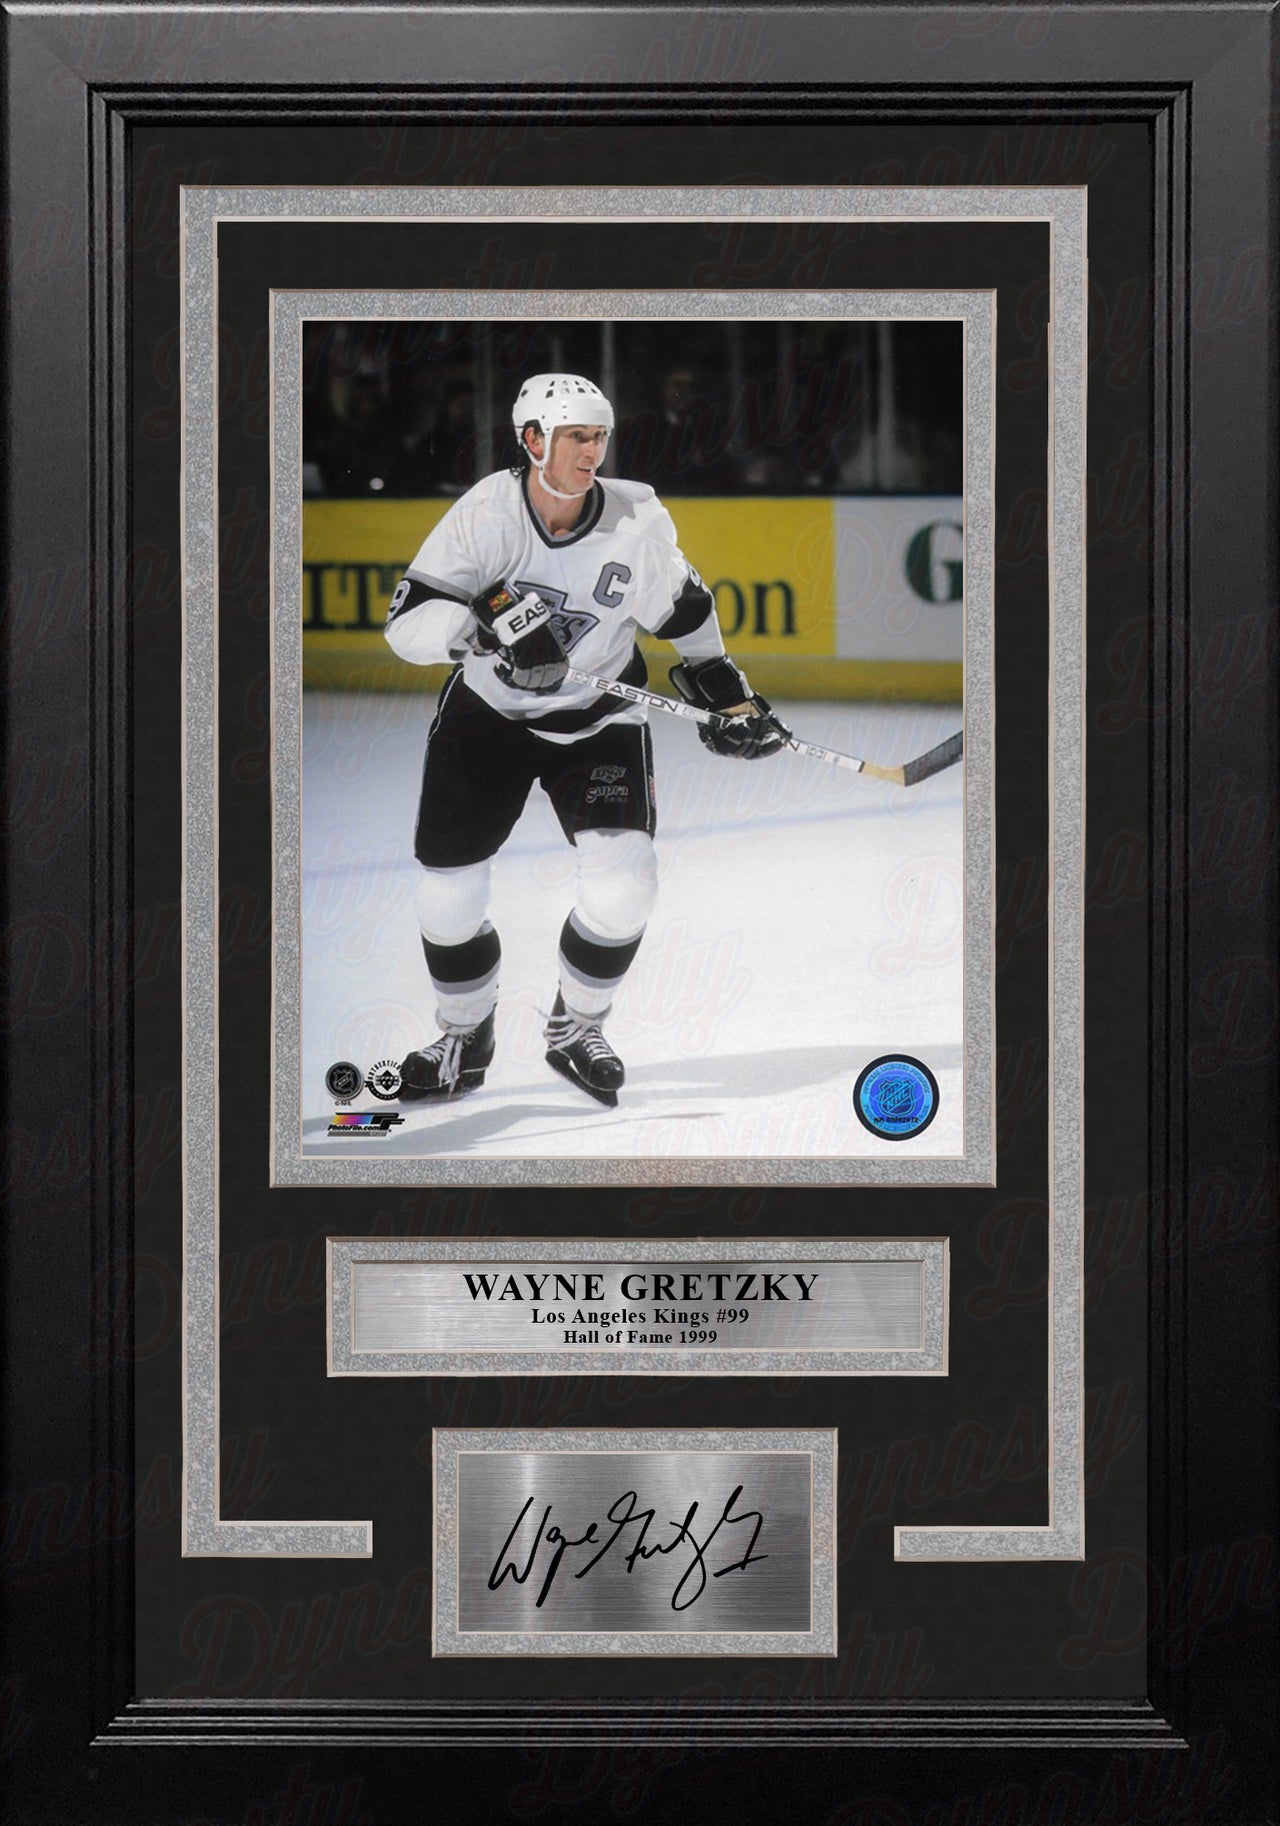 Wayne Gretzky in Action Los Angeles Kings 8" x 10" Framed Hockey Photo with Engraved Autograph - Dynasty Sports & Framing 